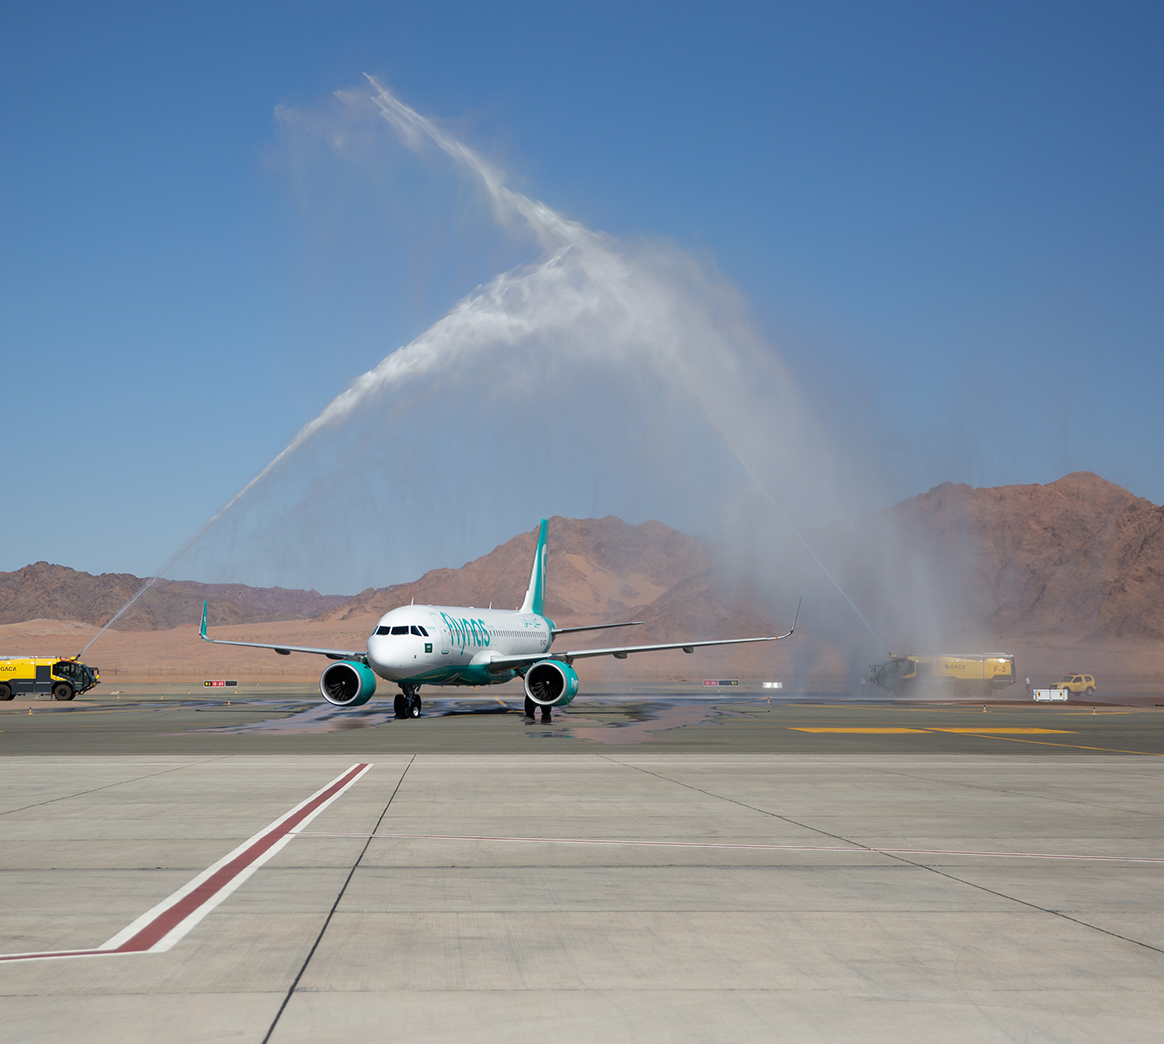 AlUla International Airport Receives the First Direct International Flight Operated by flynas